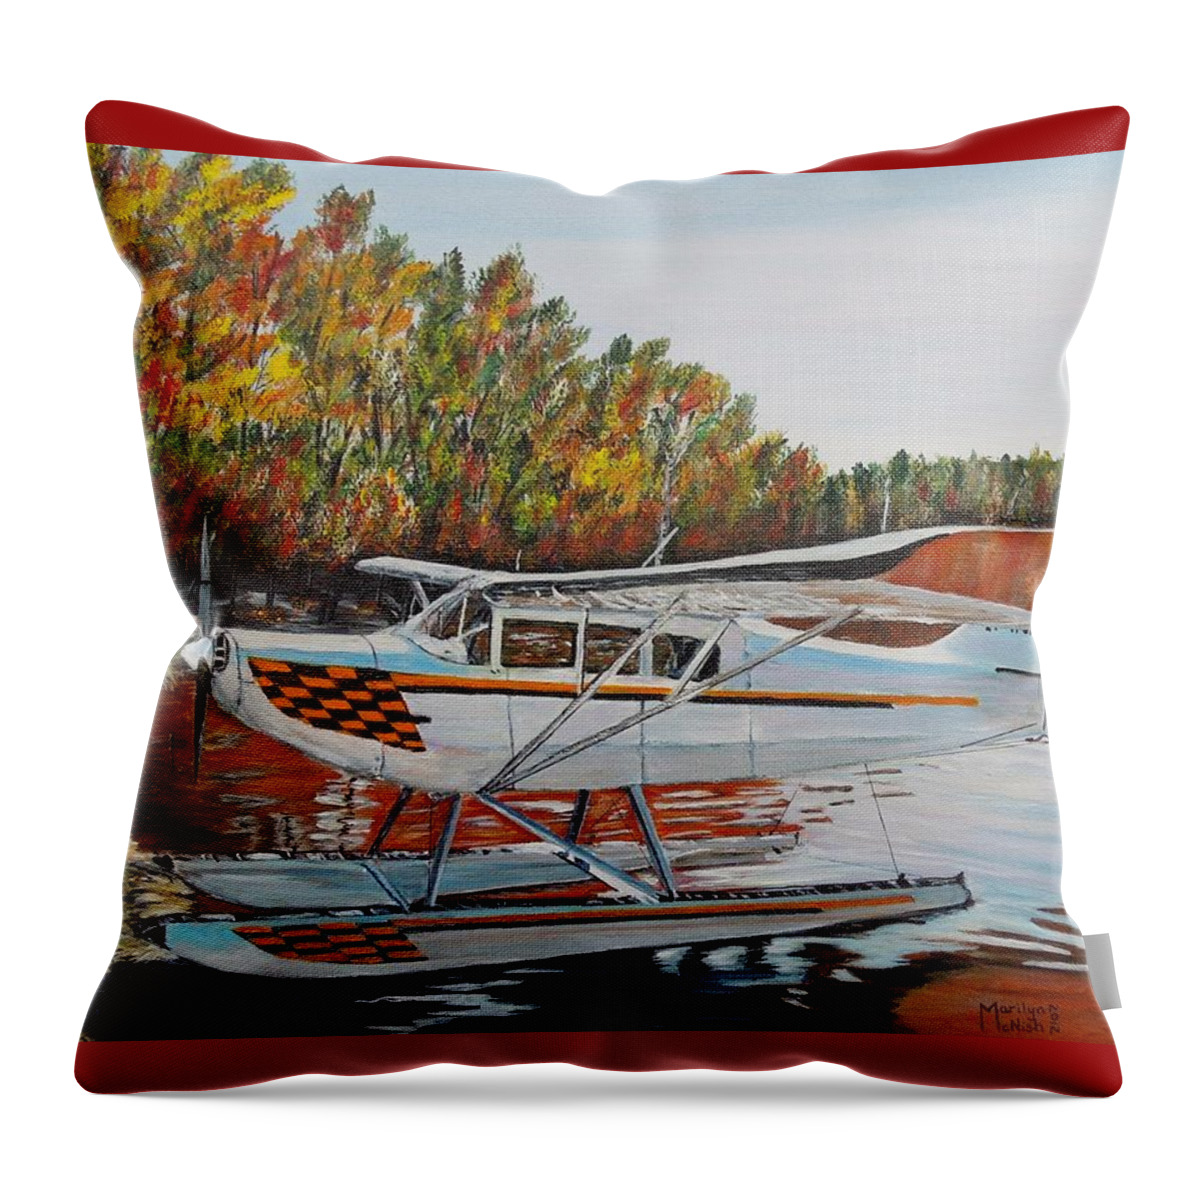 Aeronca Chief Float Plane Throw Pillow featuring the painting Aeronca Super Chief 0290 by Marilyn McNish